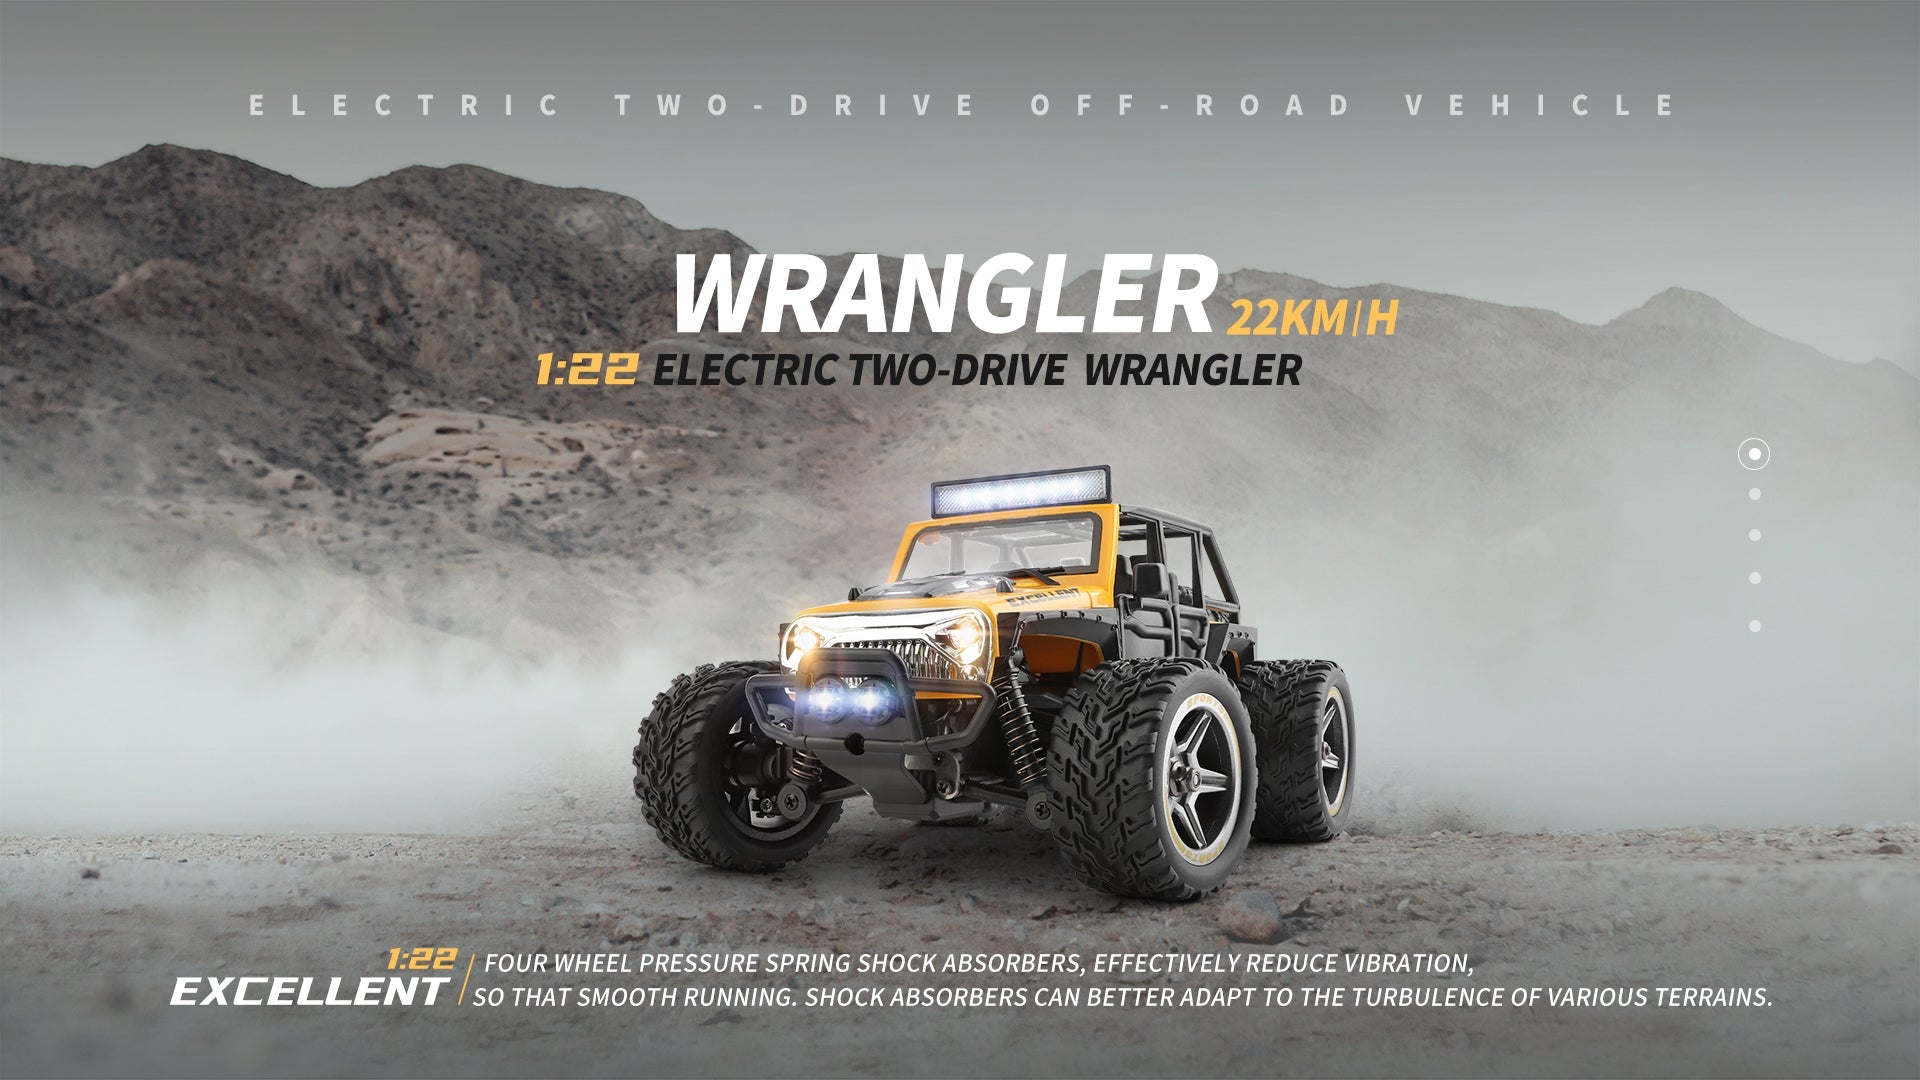 Remote Control 1:22 Electric Wrangler Toy